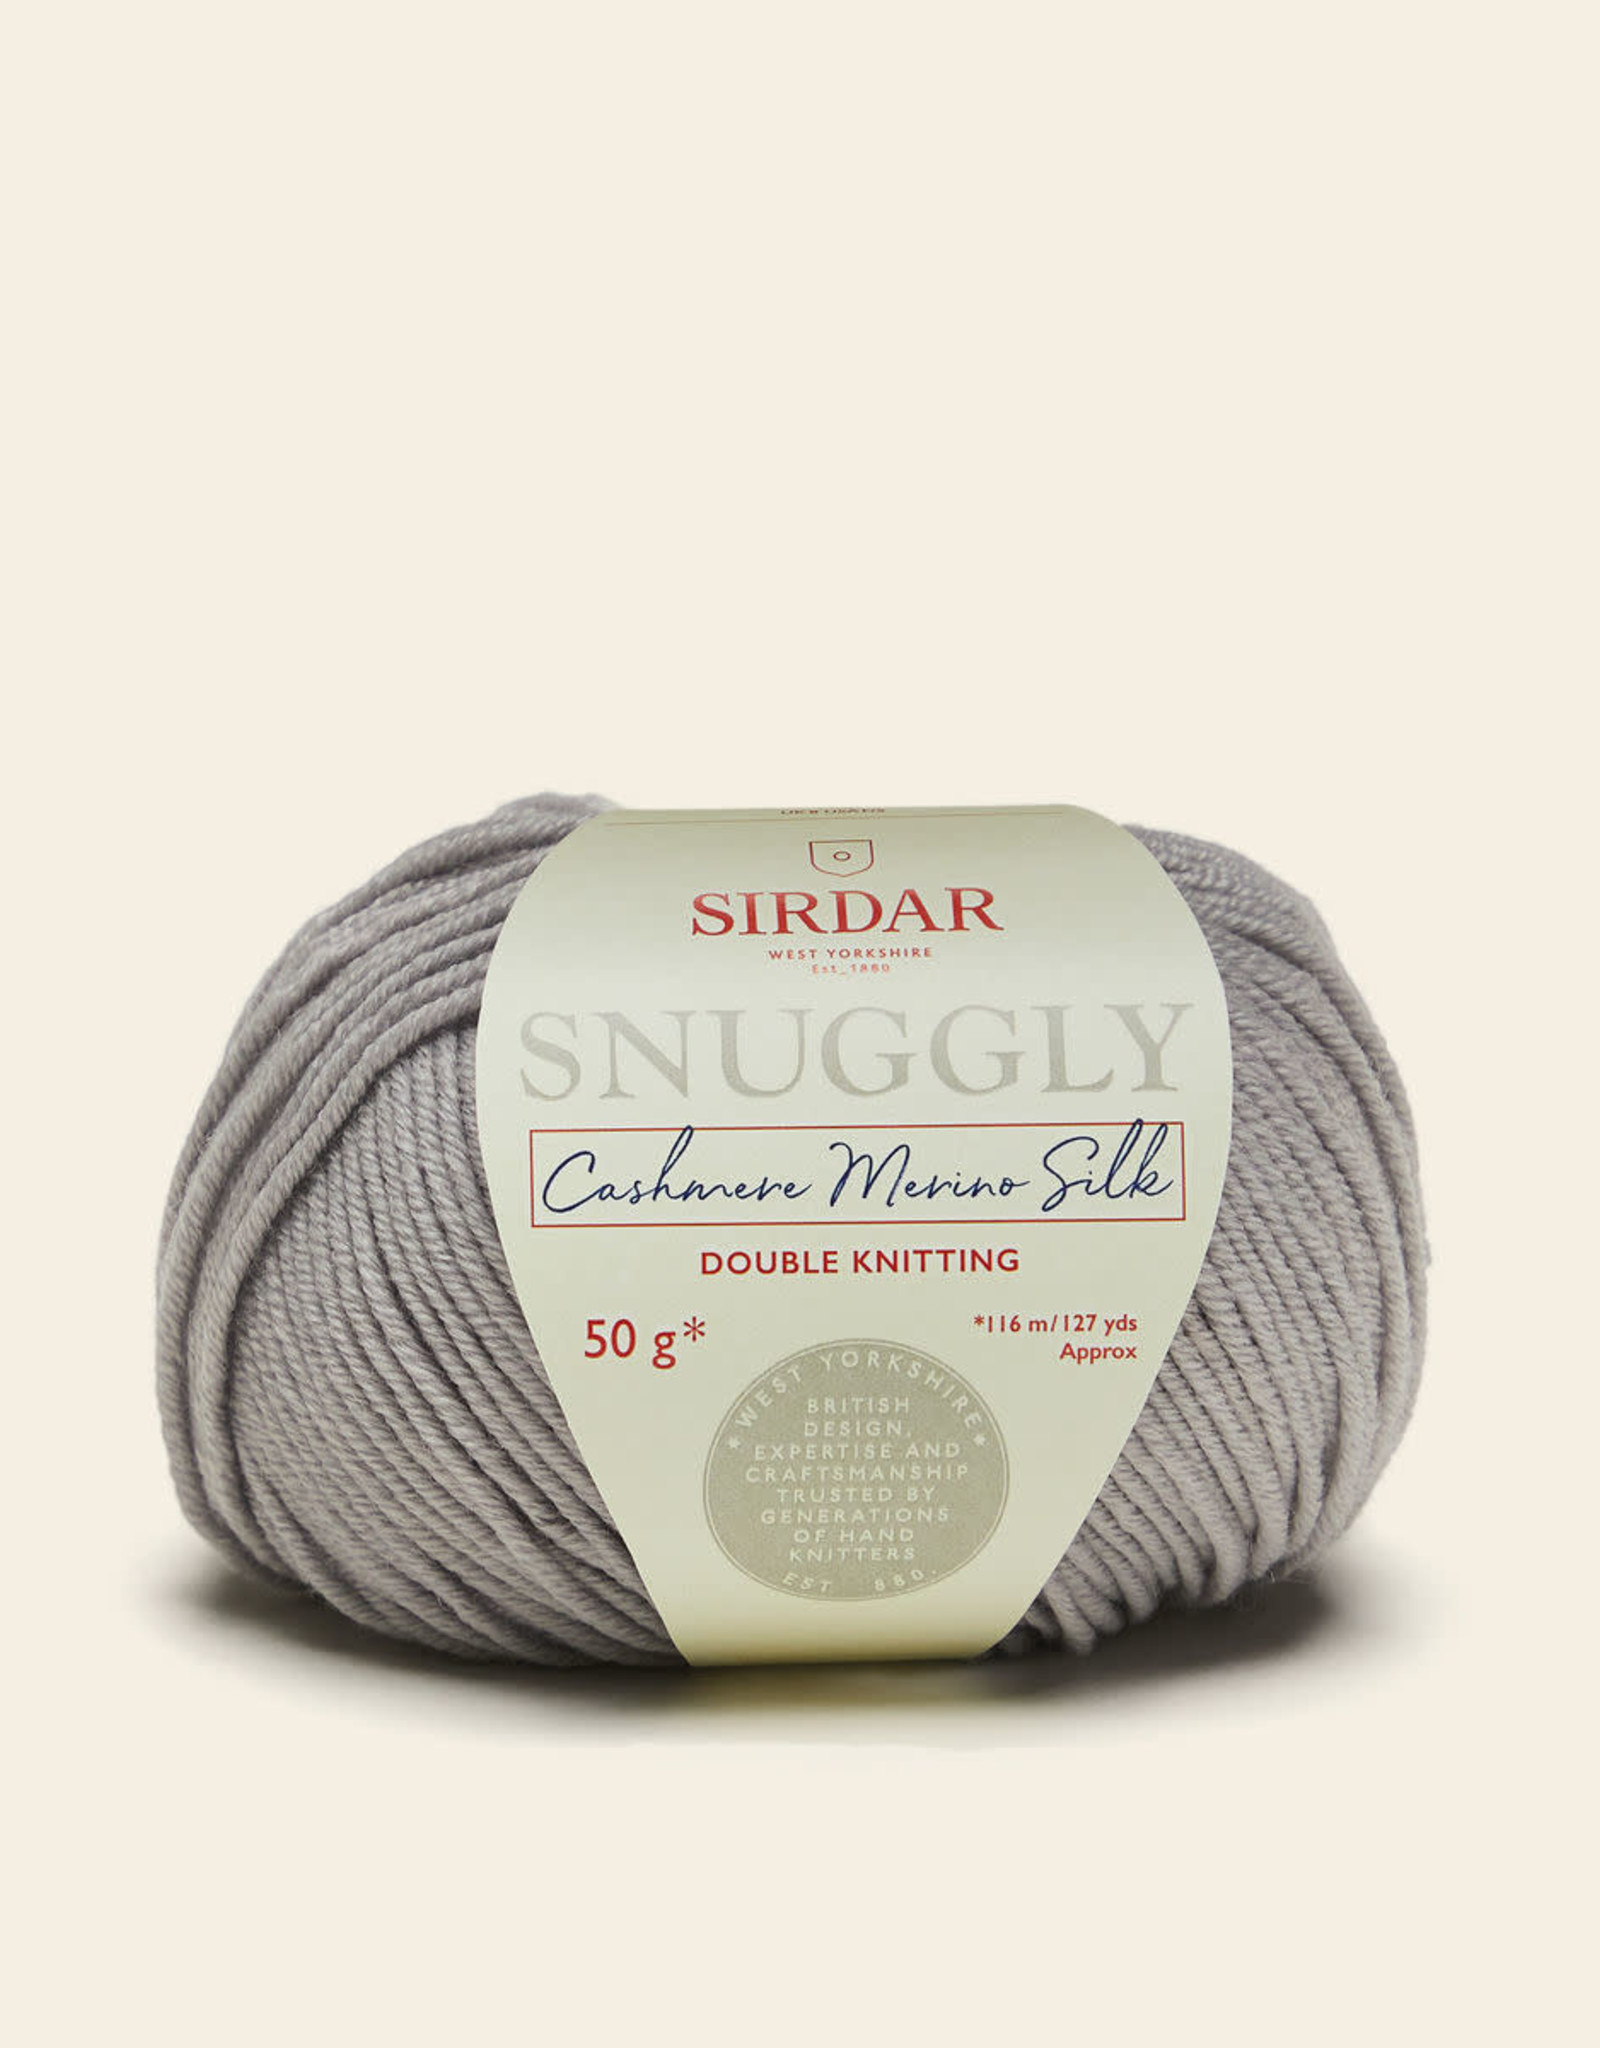 Snuggly Snuggly Cashmere Merino Silk DK 306 silvery moon